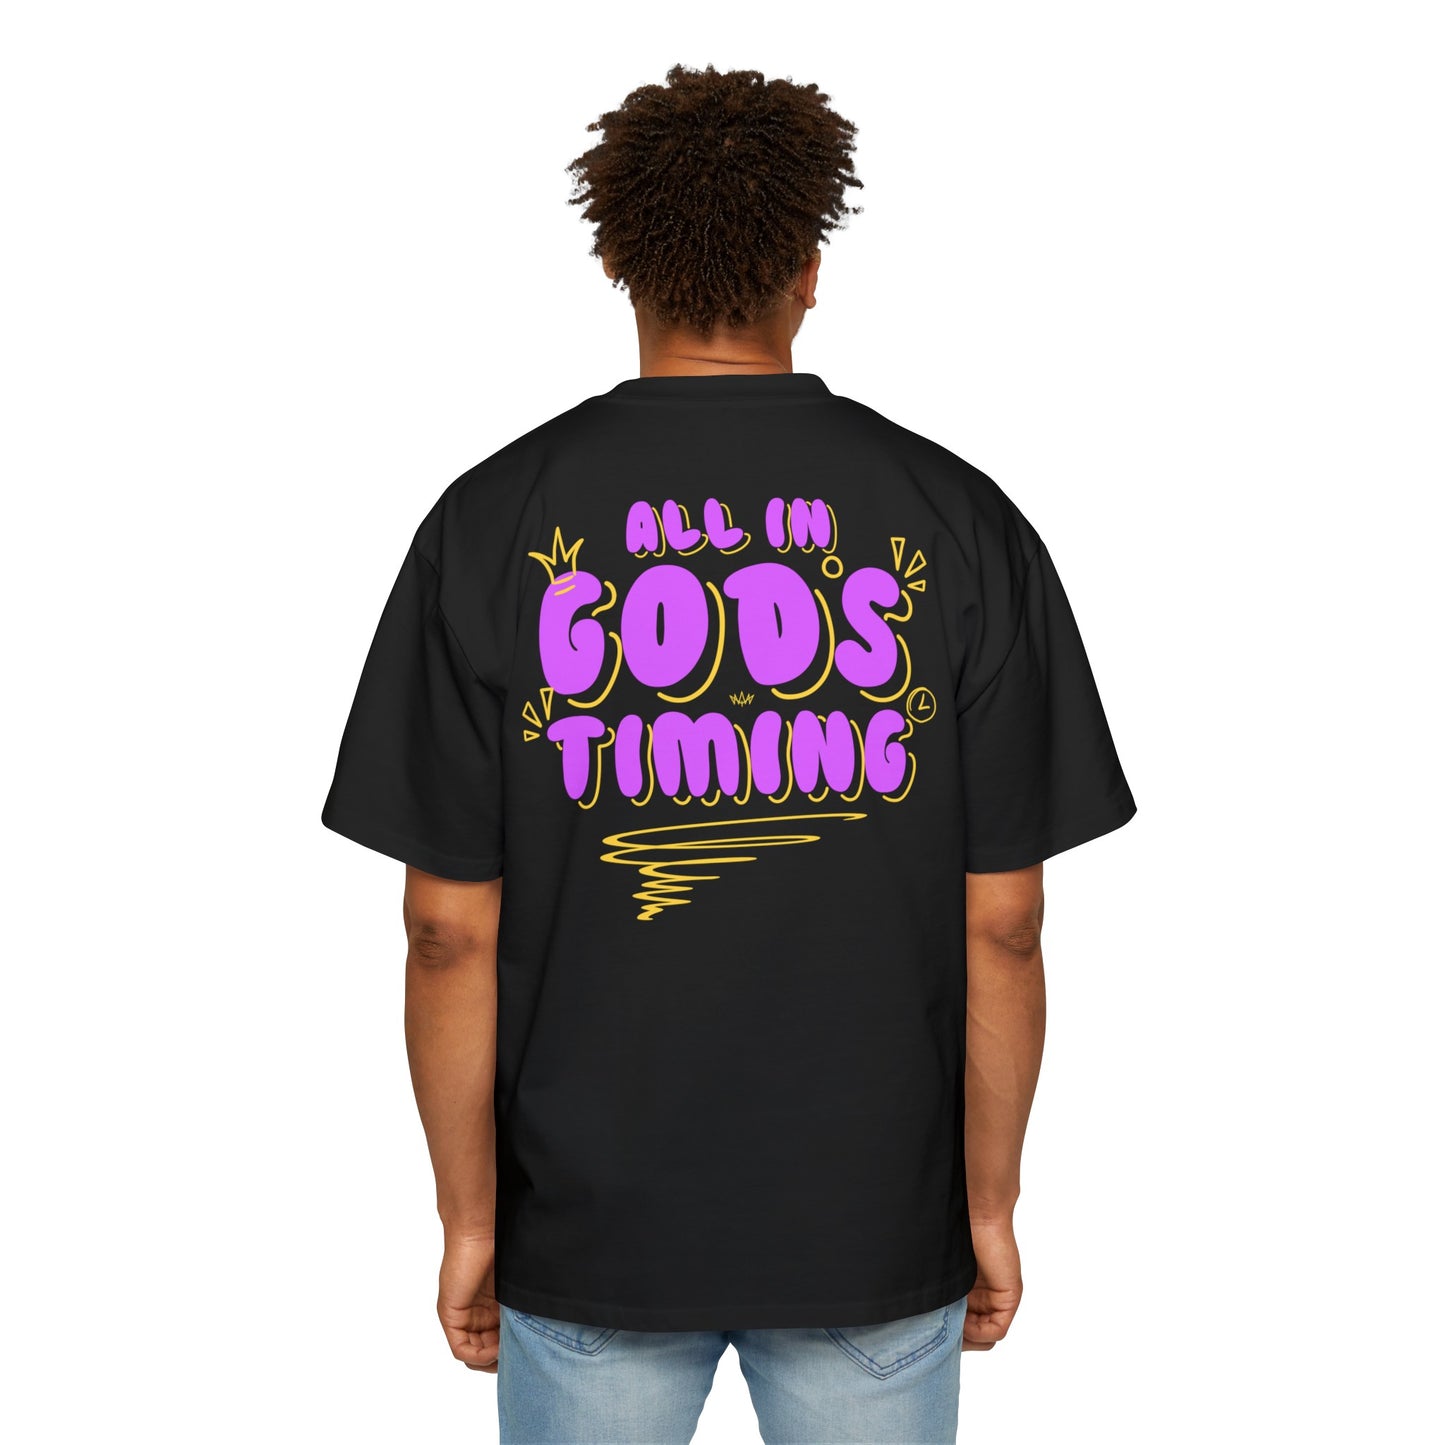 All In Gods Timing Oversized Tee